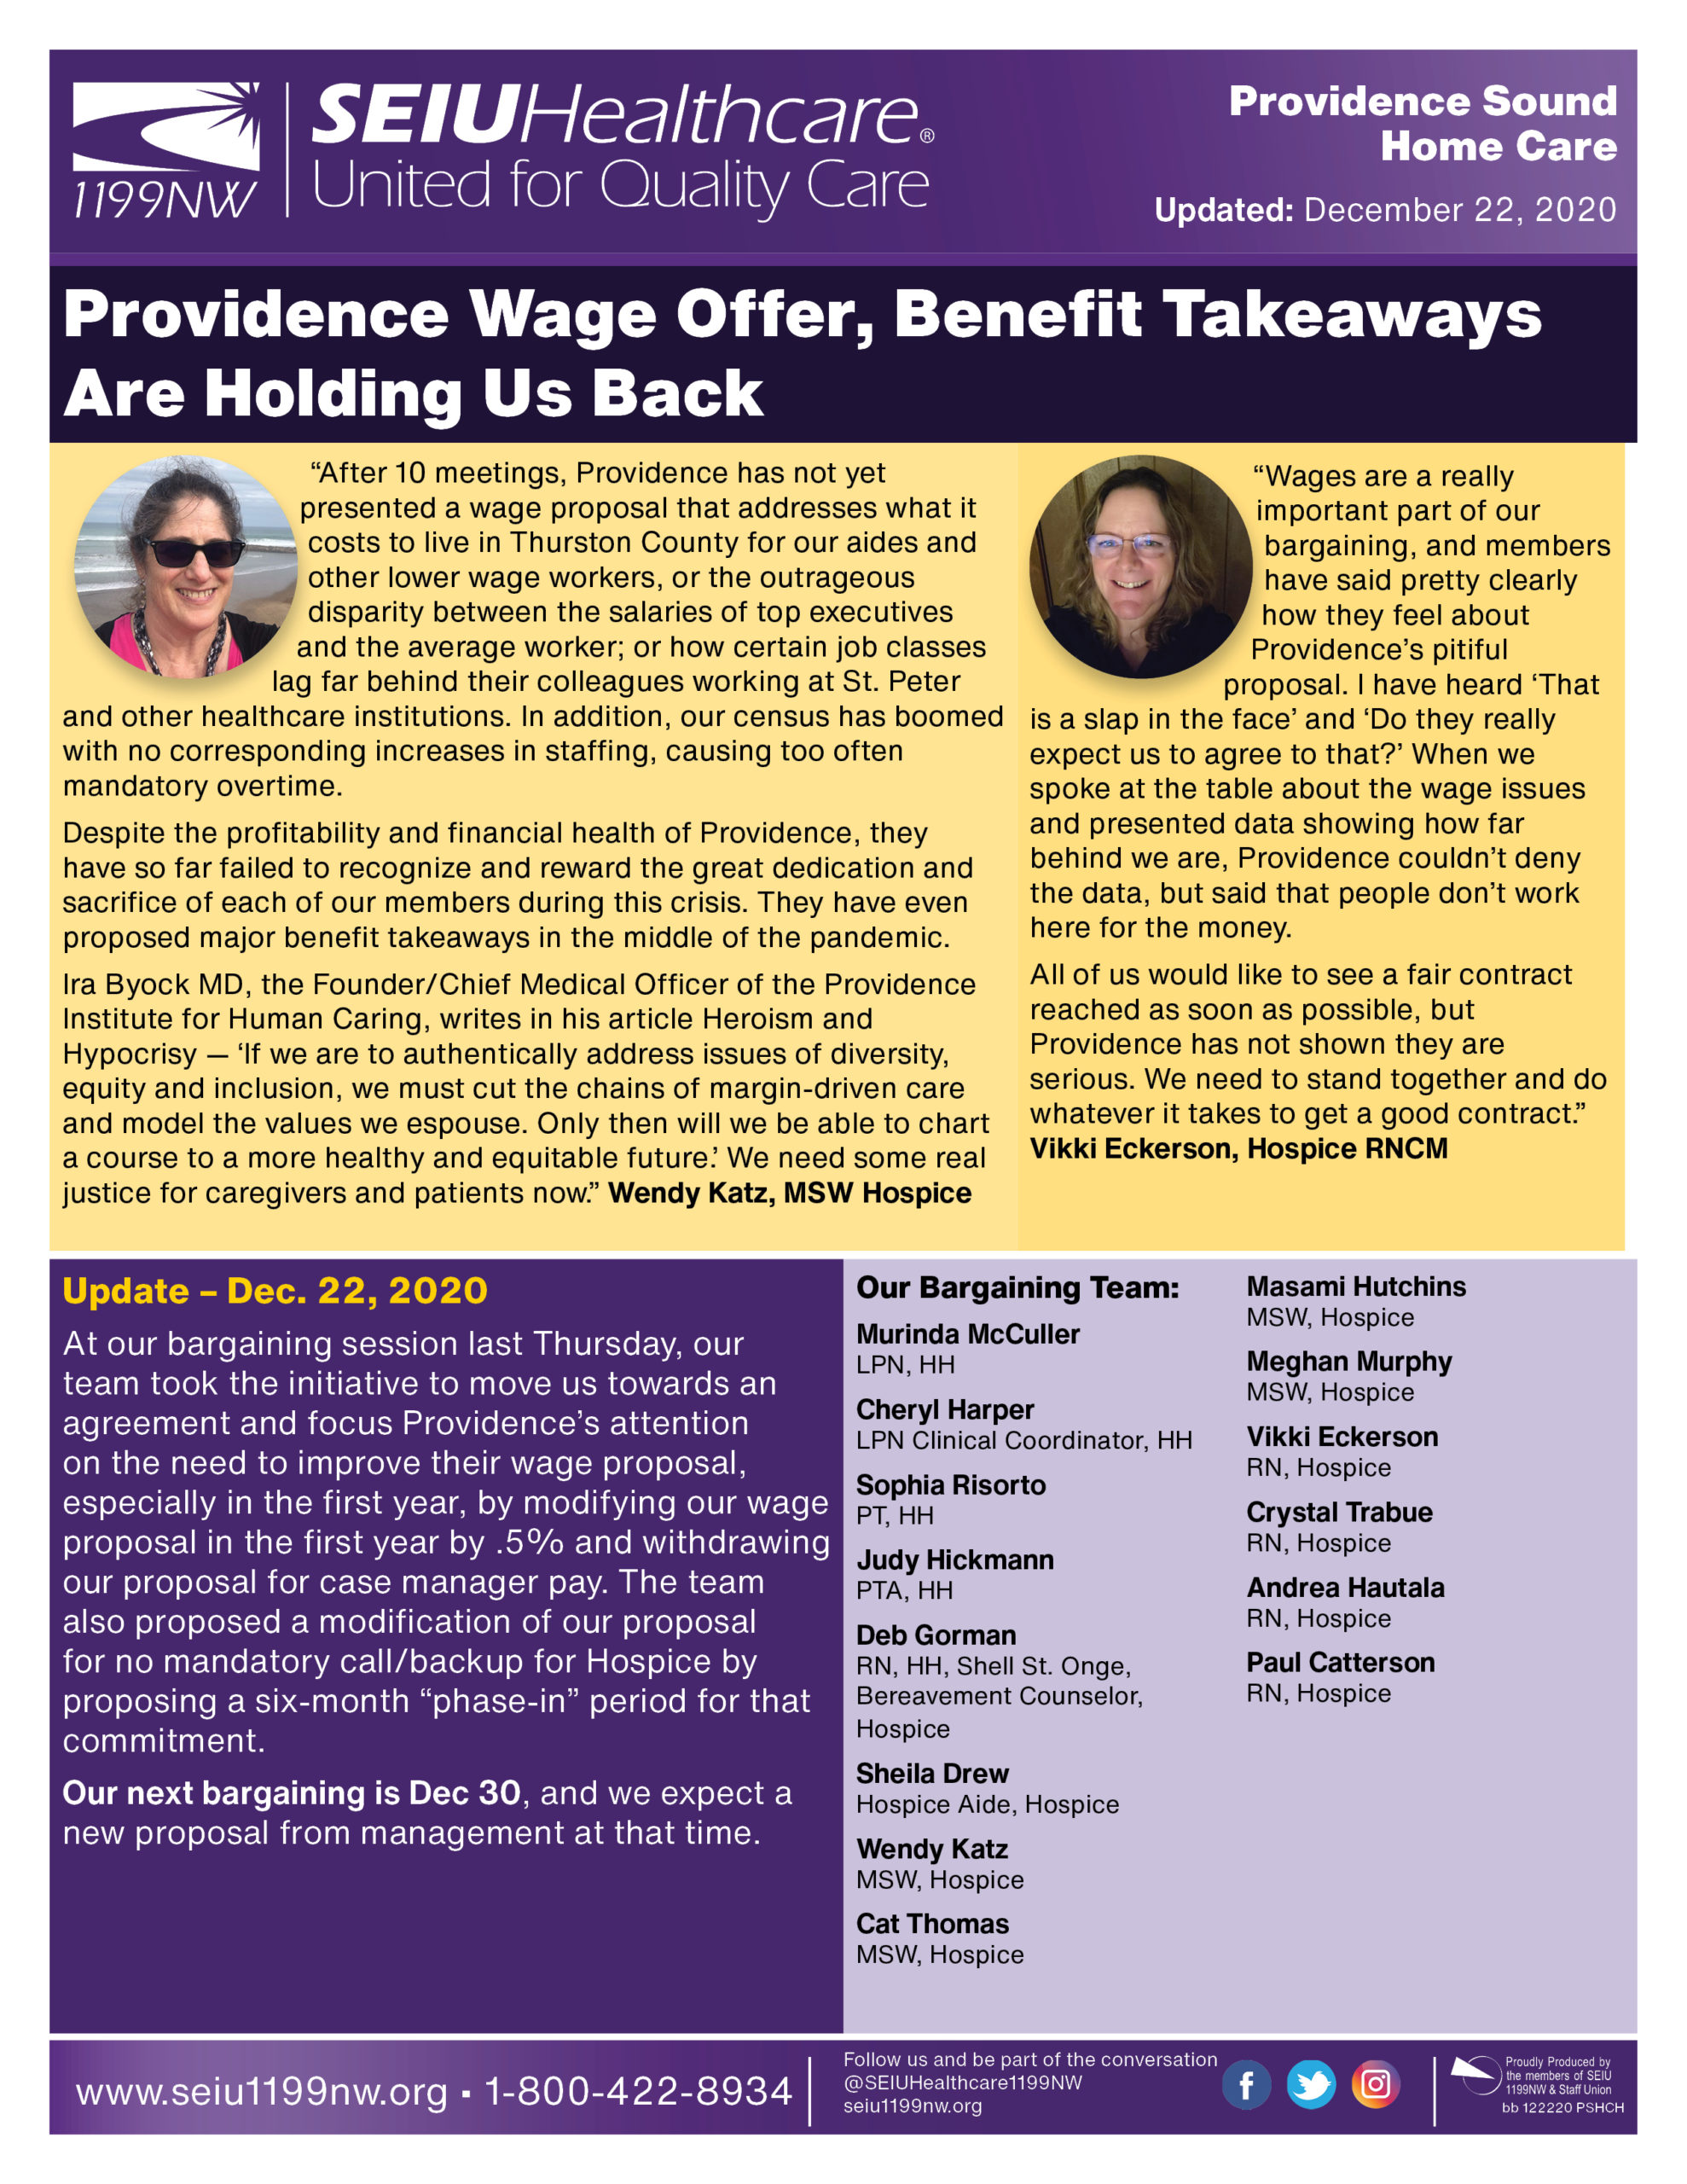 Providence Wage Offer, Benefit Takeaways Are Holding Us Back